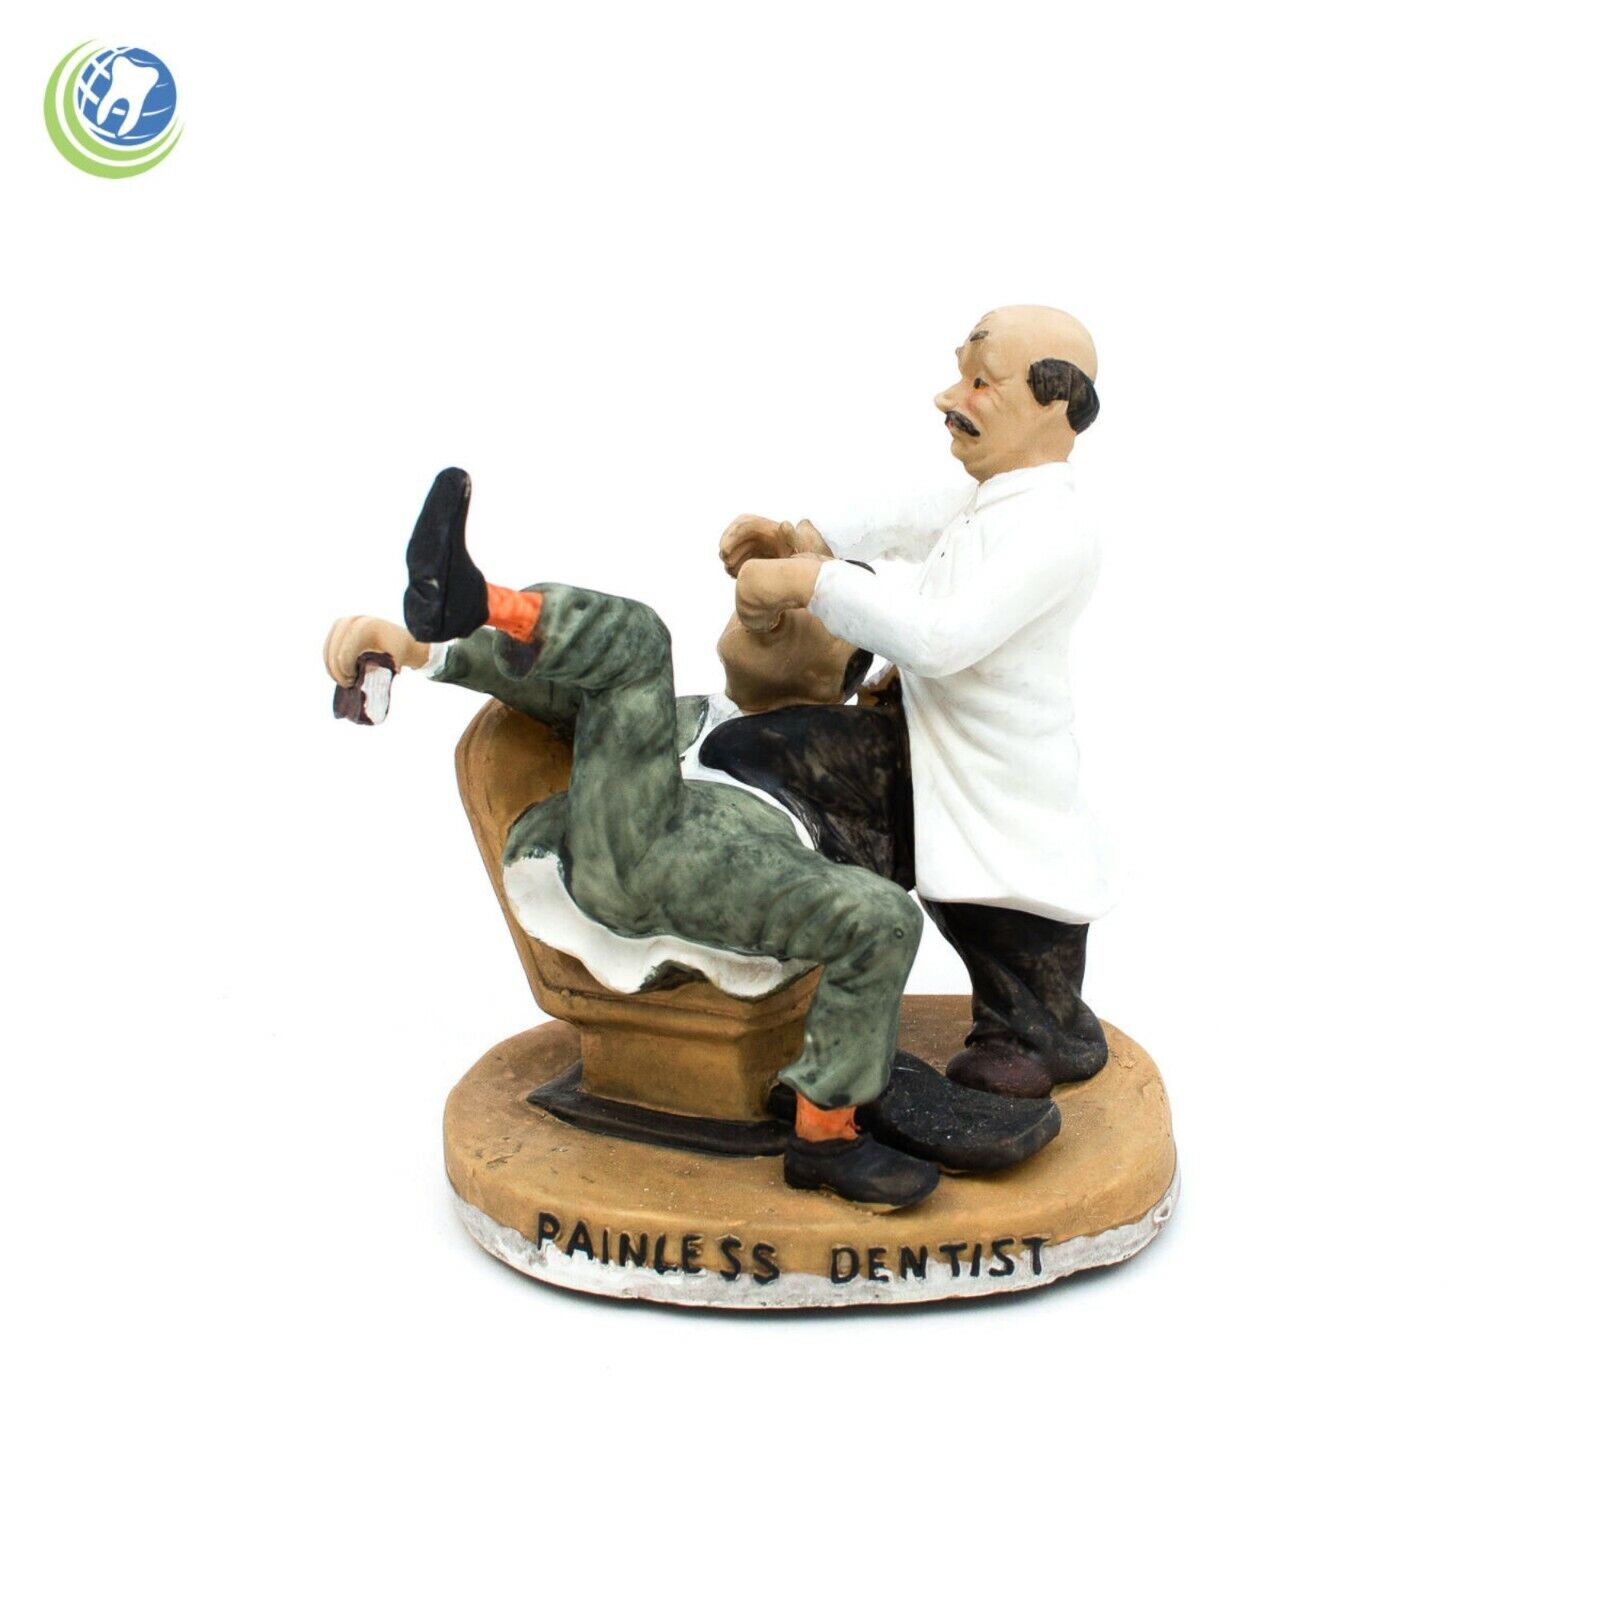 Classic Vintage Figurine Dentist Performing Painless Extraction On Patient Ouch